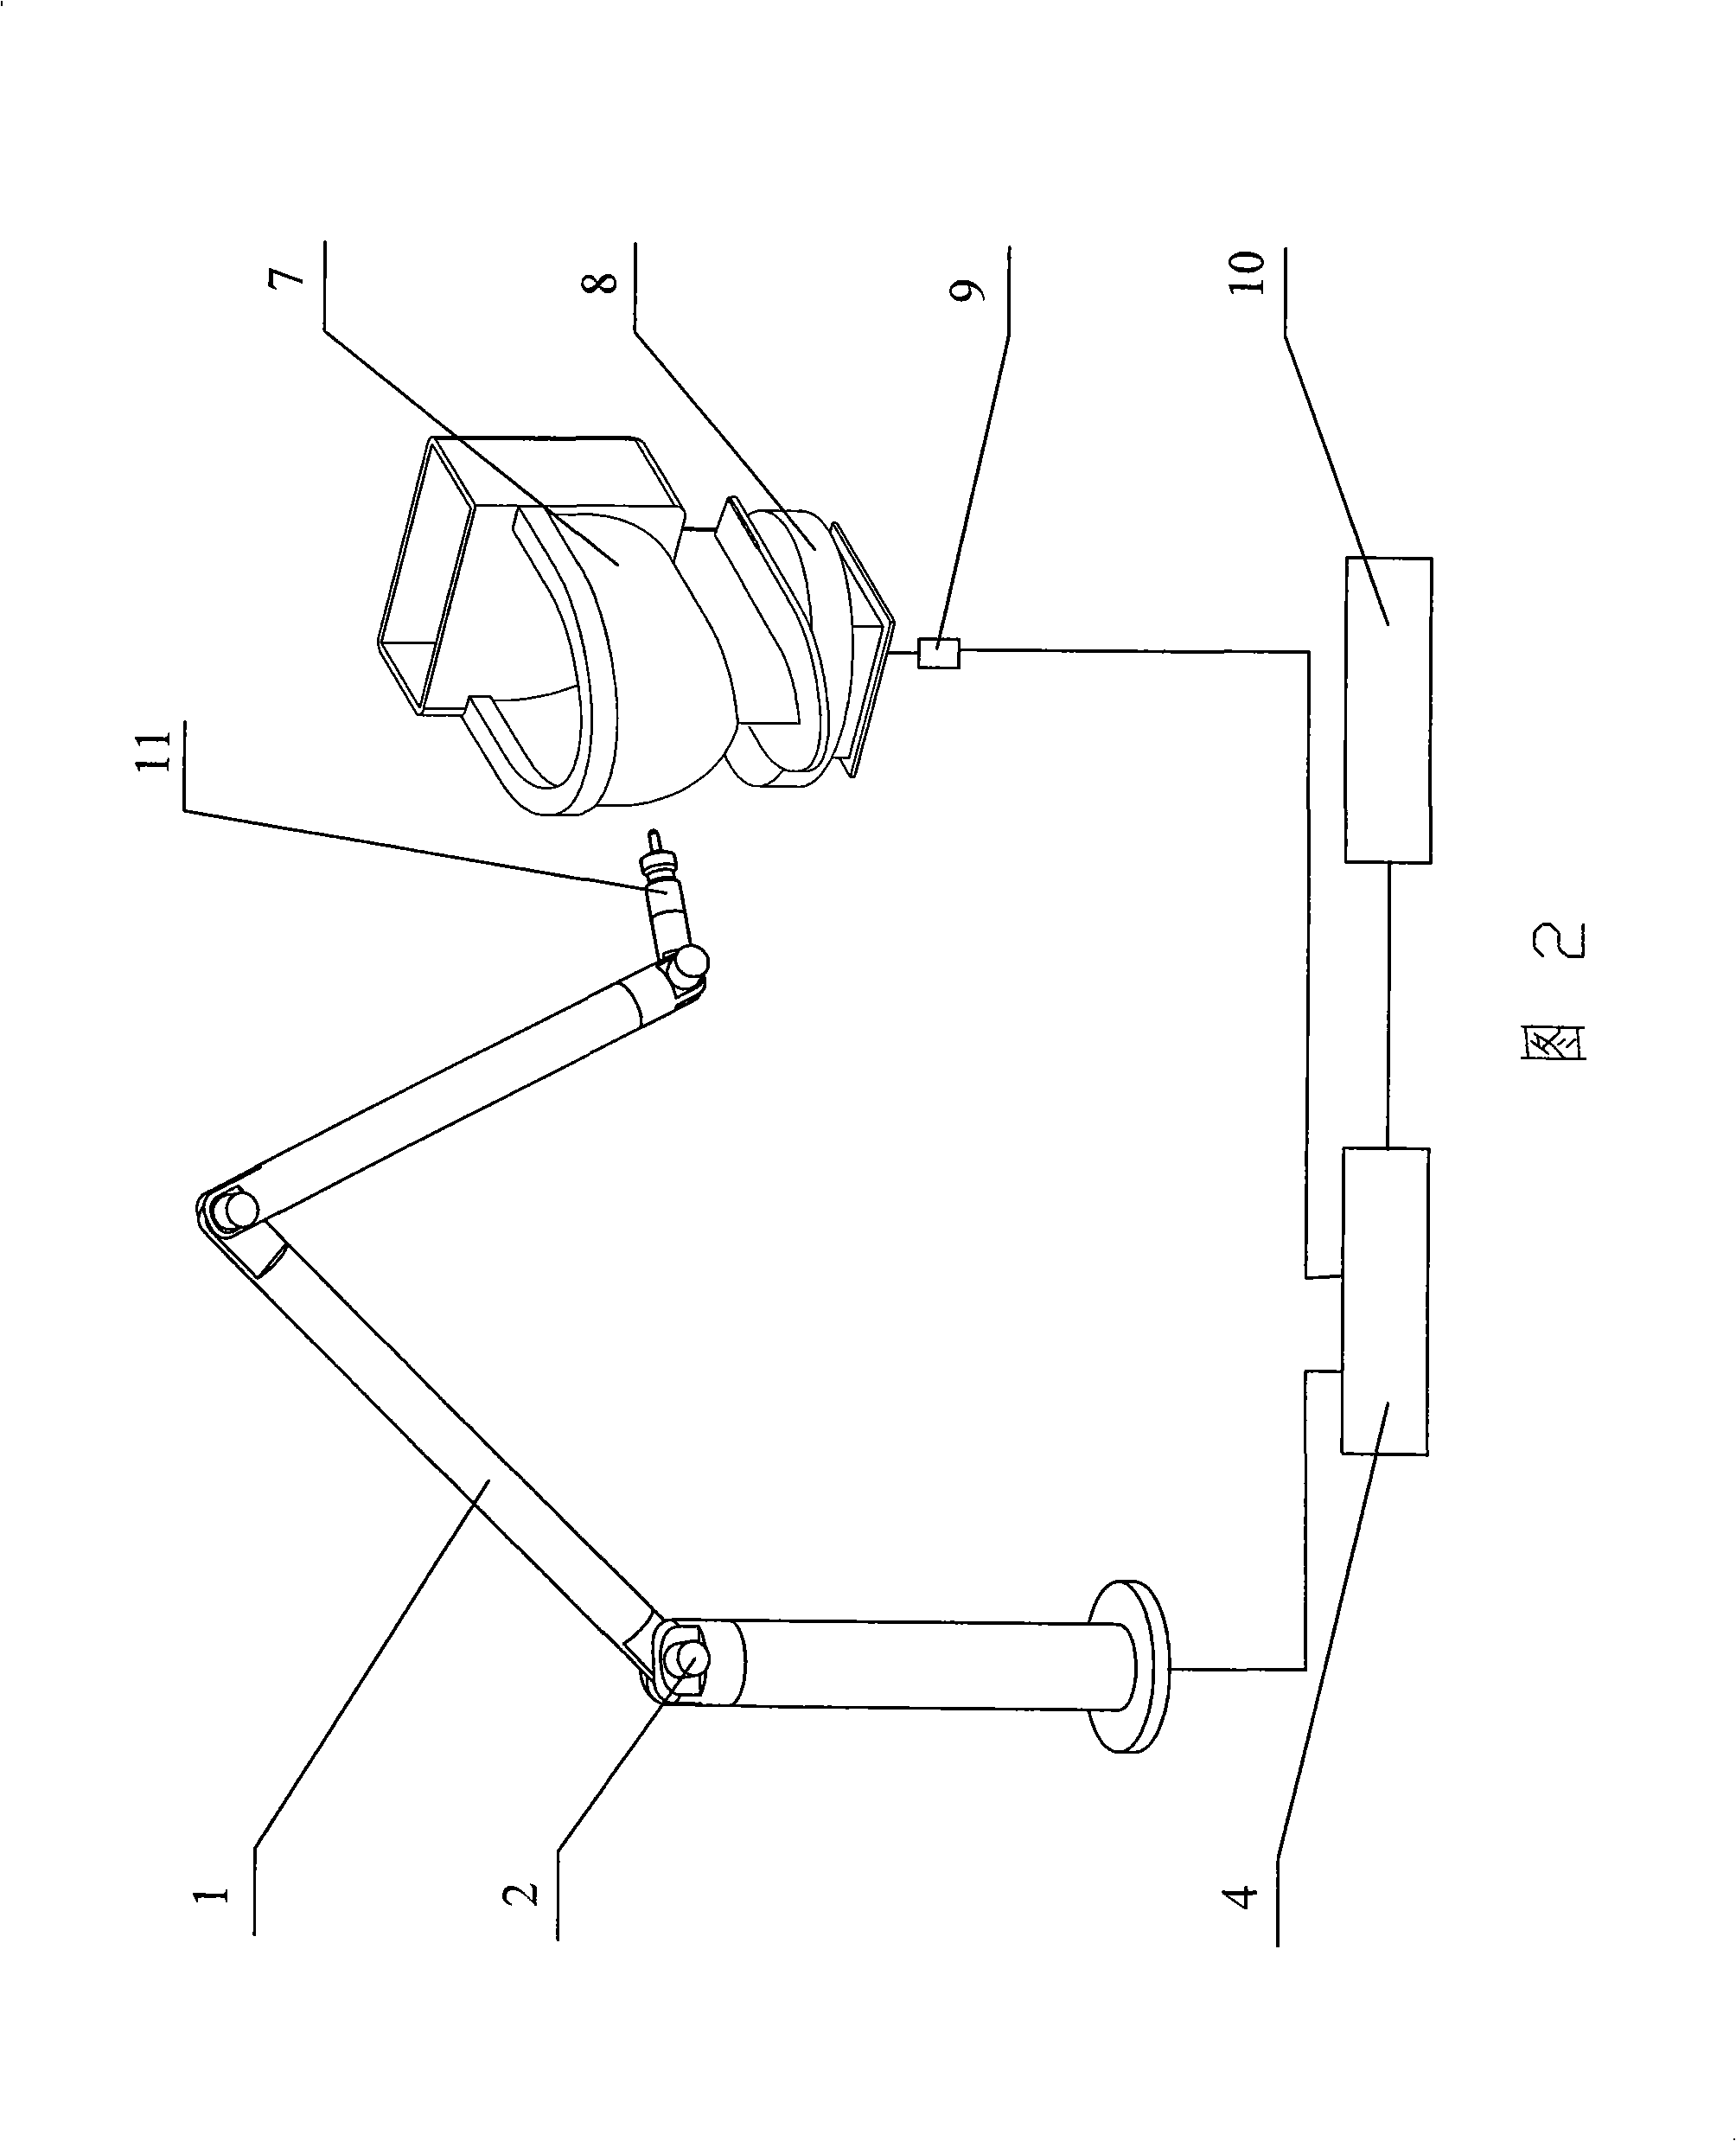 Glazing robot off-line teaching device and teaching method